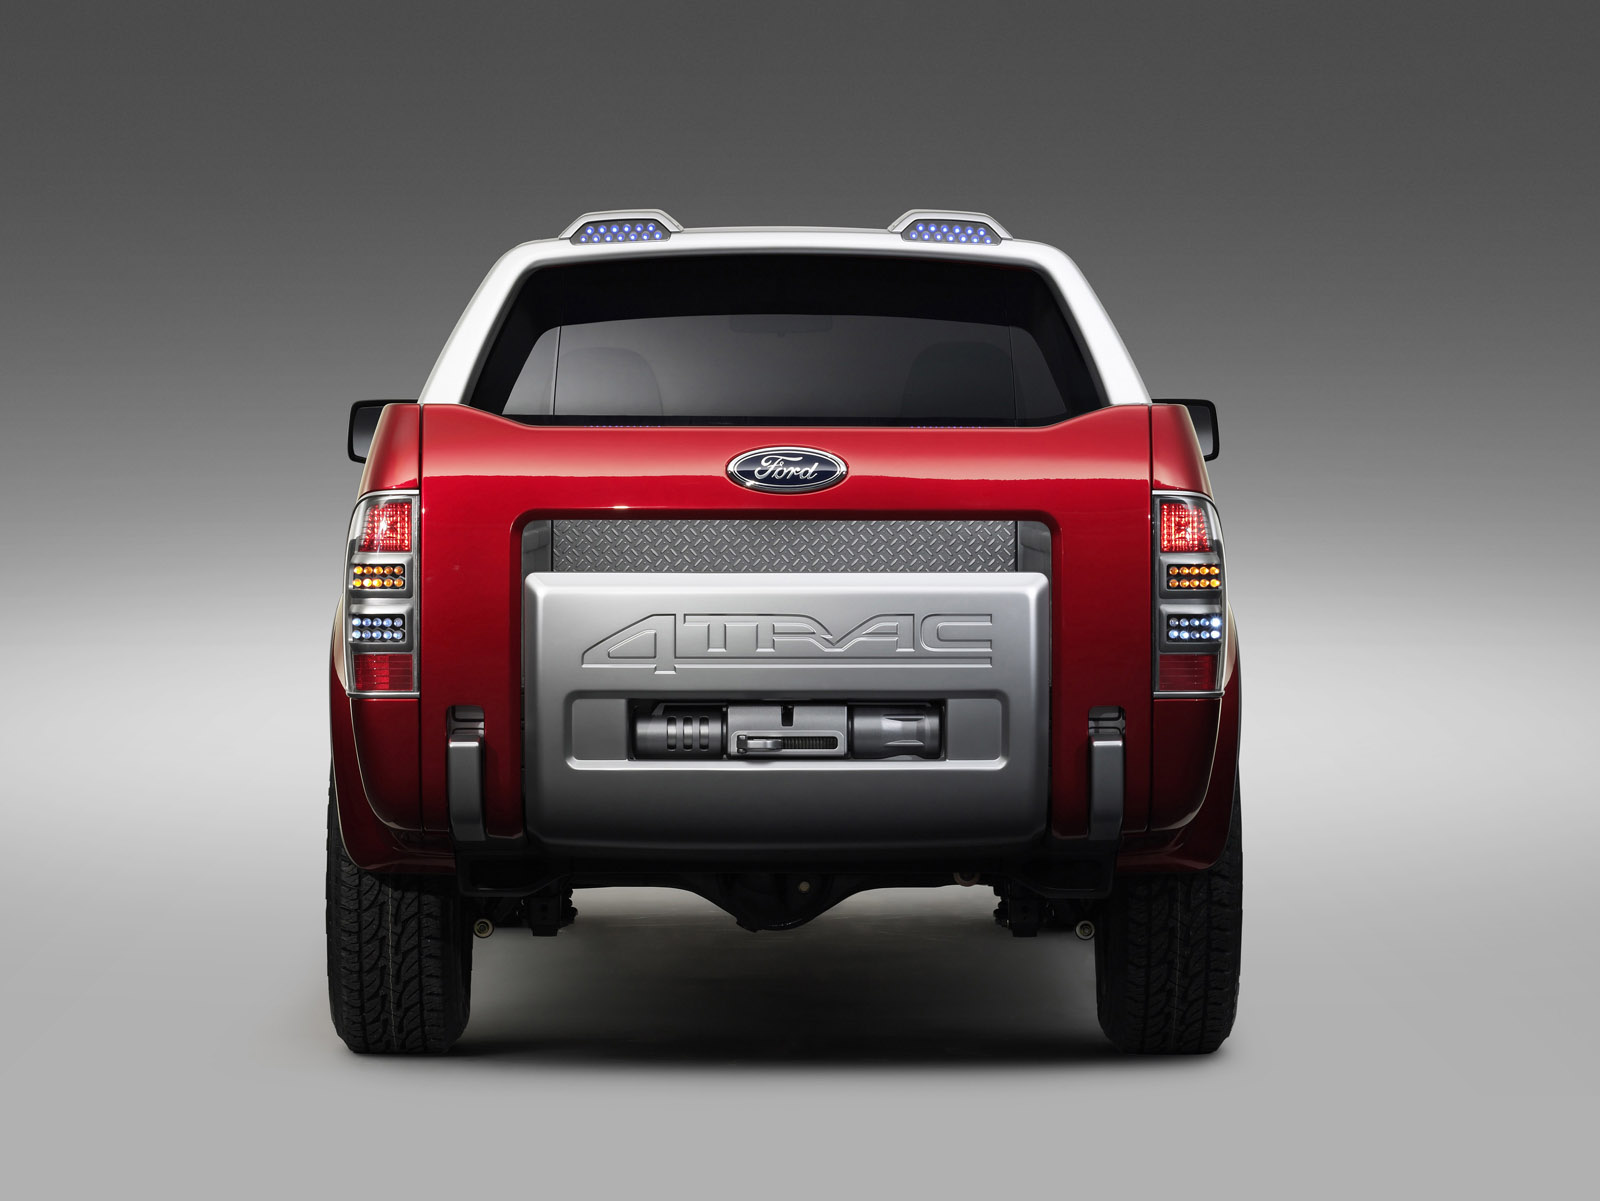 Ford 4 Trac Concept Truck